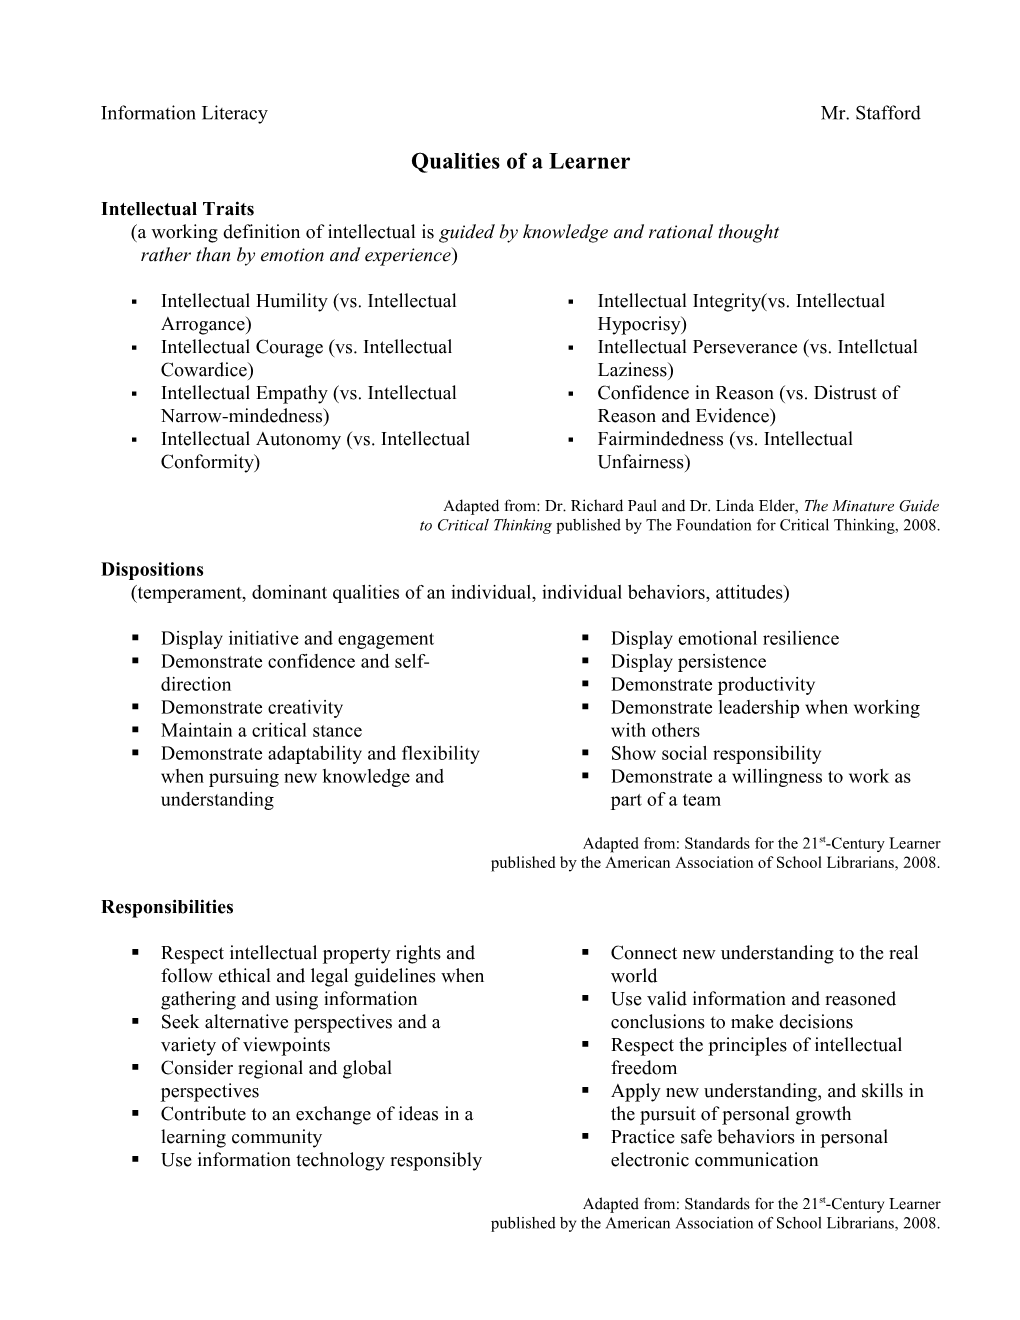 Qualities of a Learner Handout